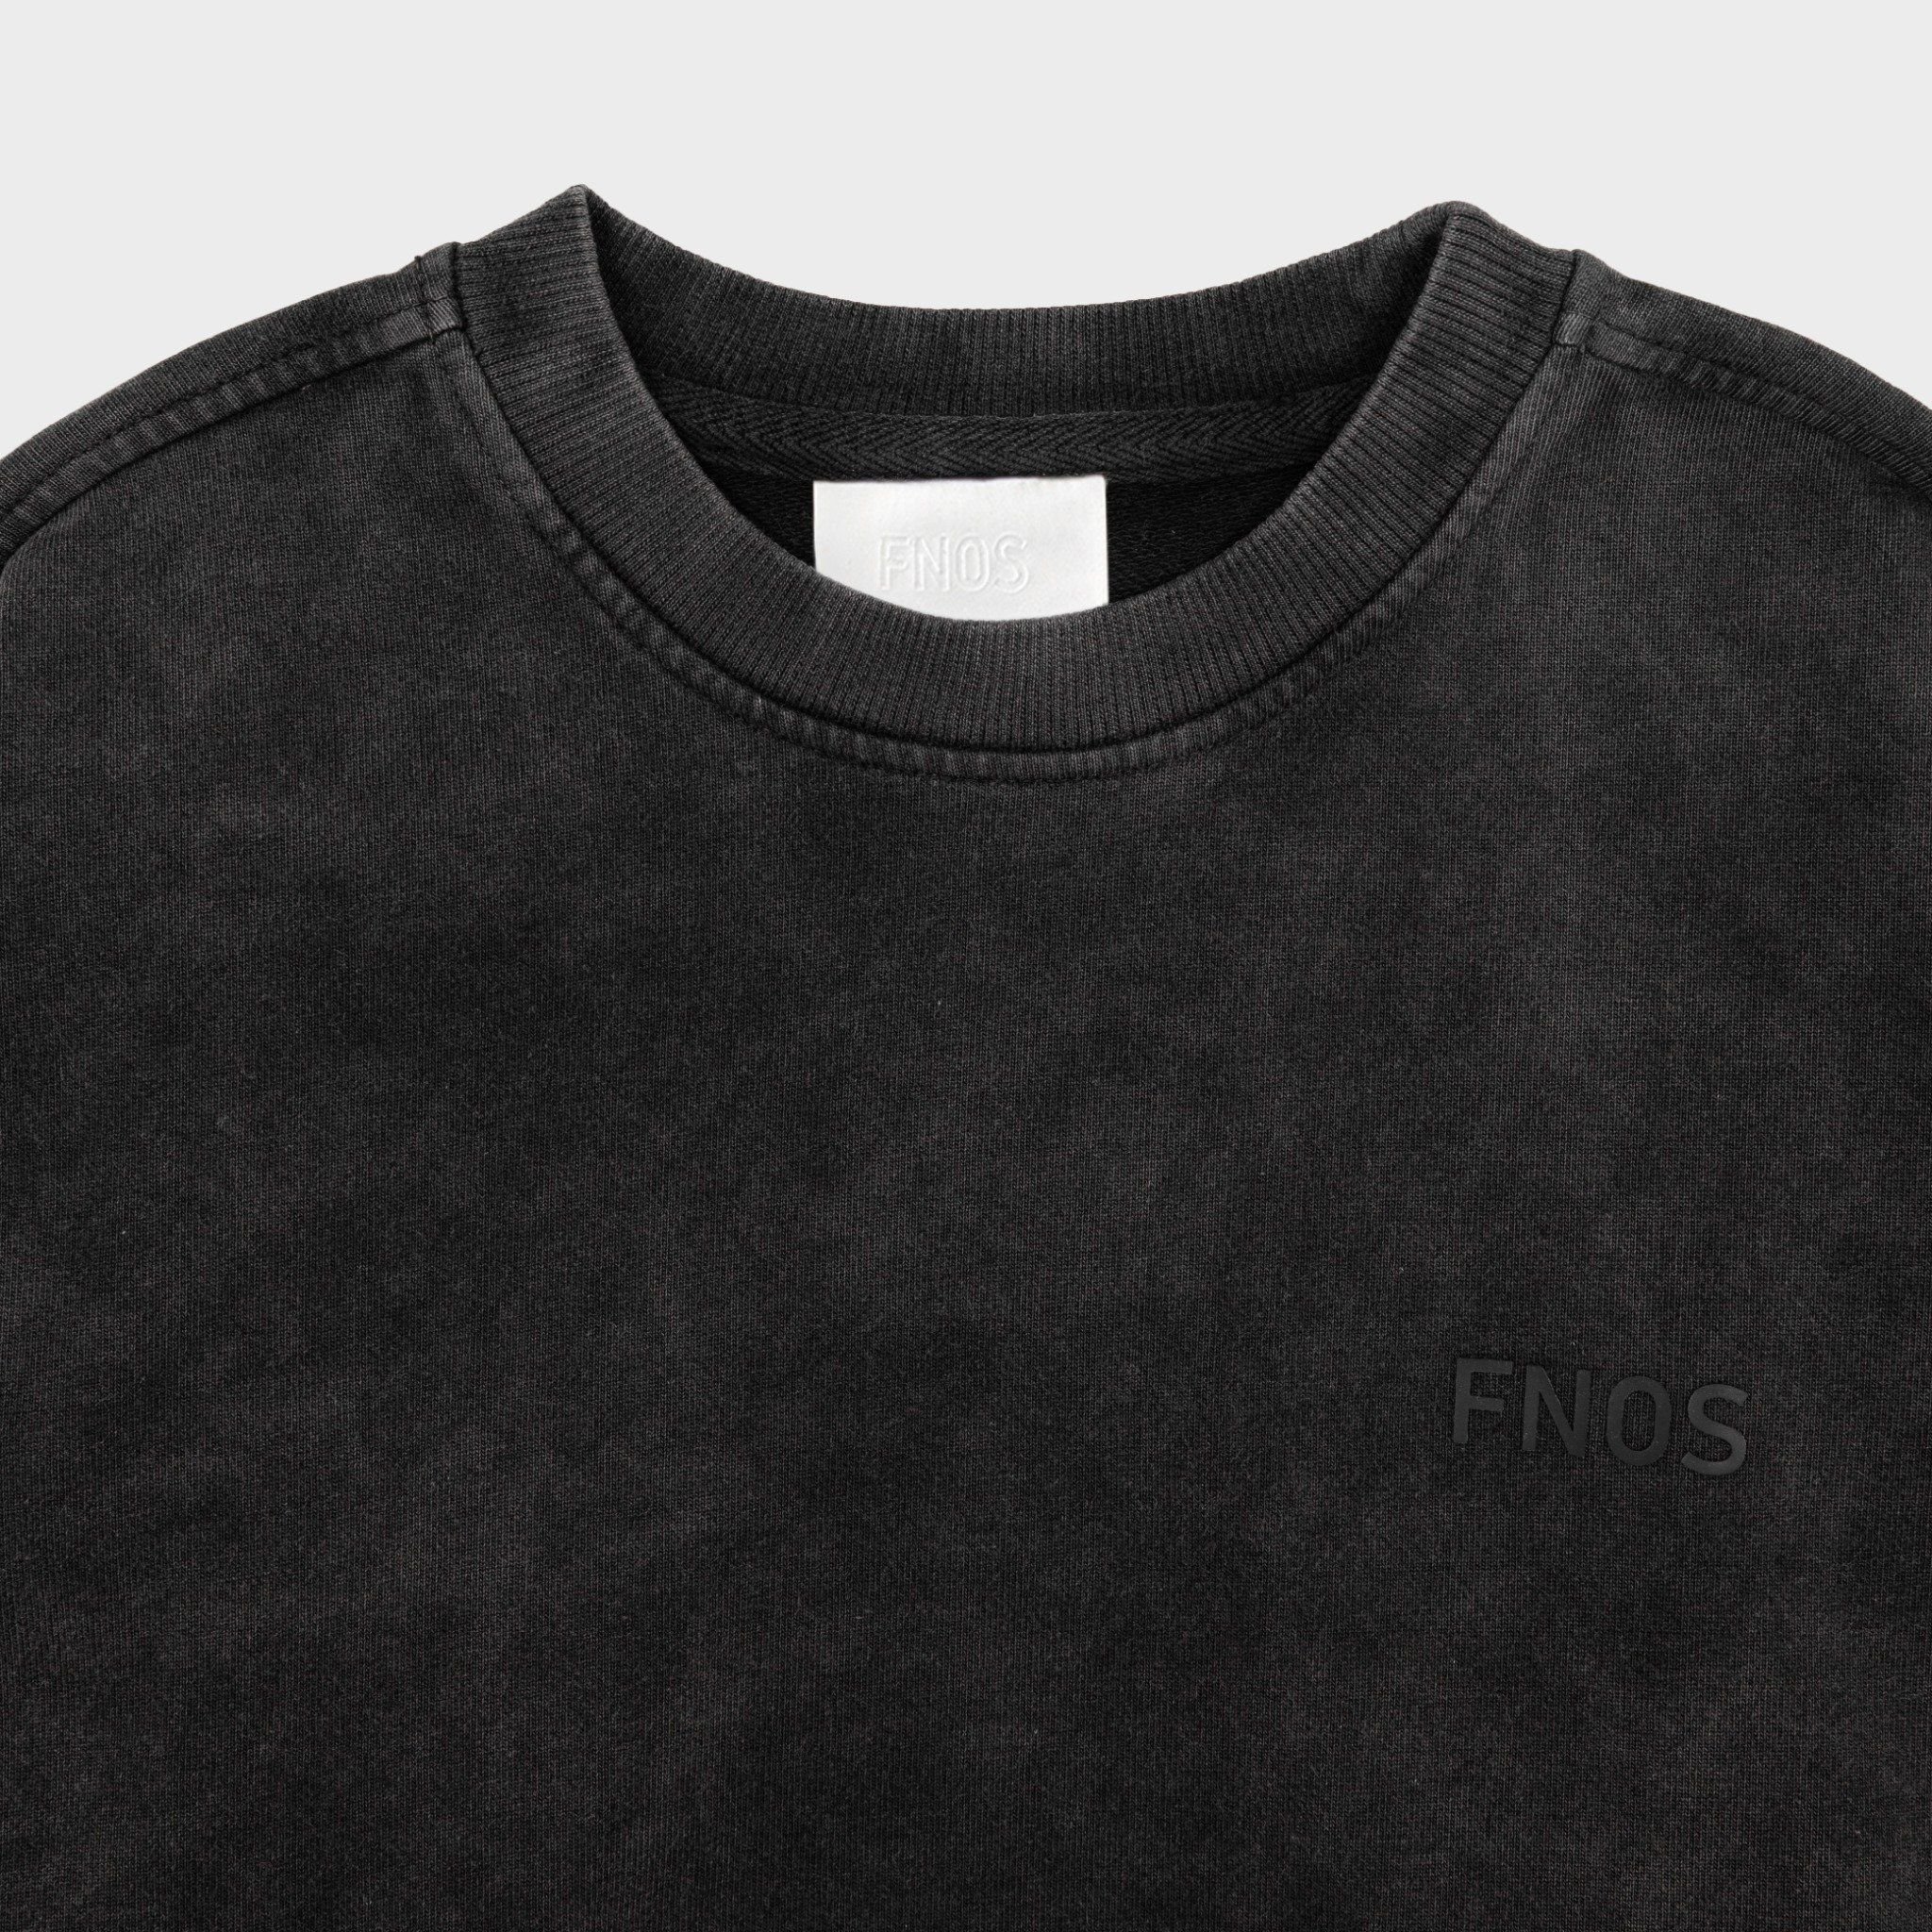  SW4 - FNOS WASHED SWEATER - BLACK 